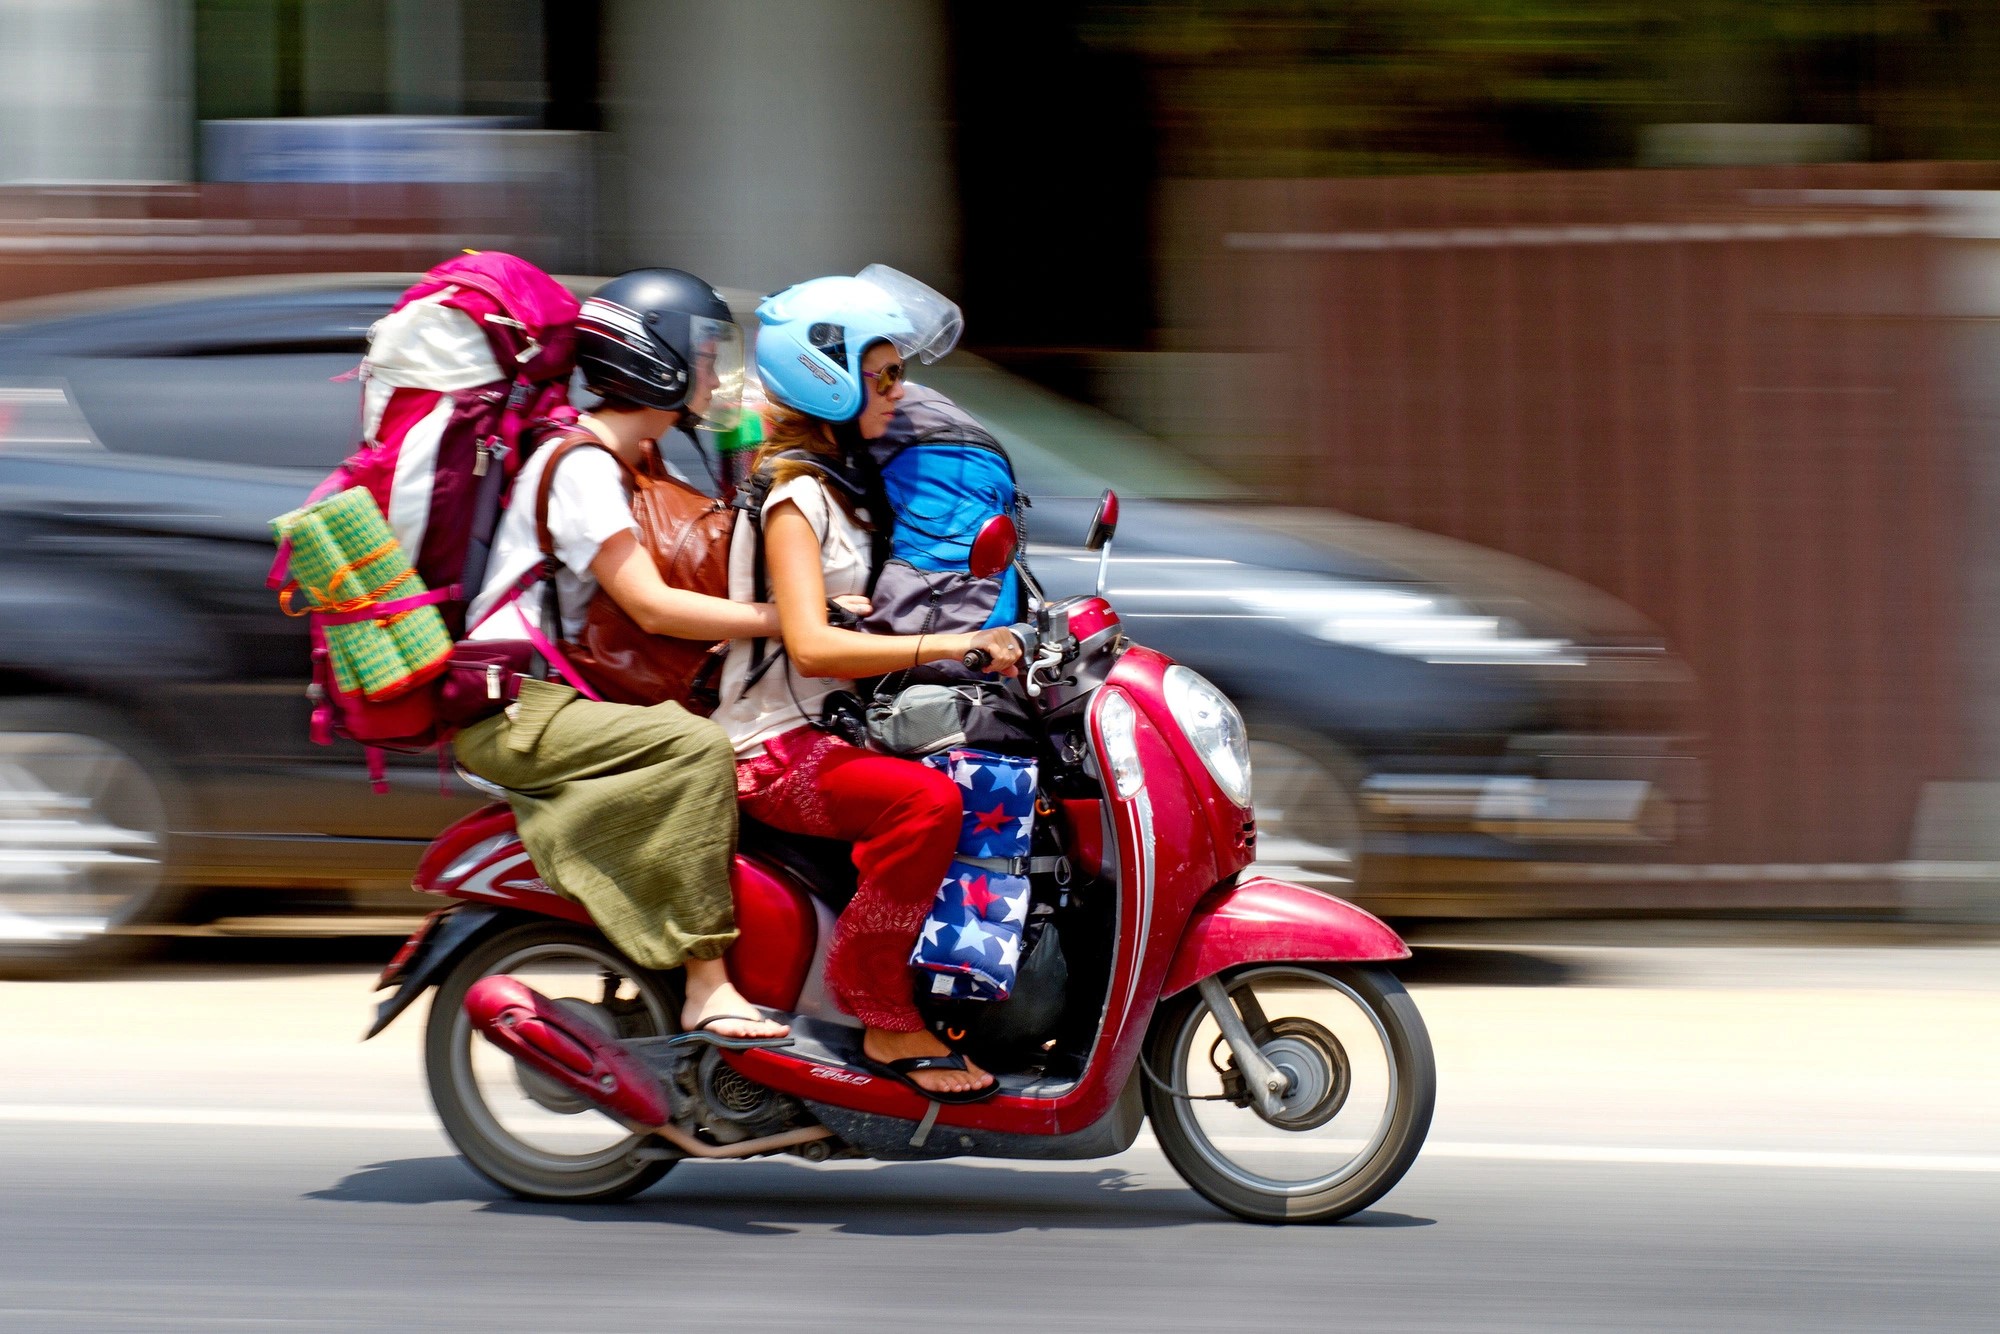 Southeast Asia holds a leading position in the global motorbike market. Photo: Adventure You